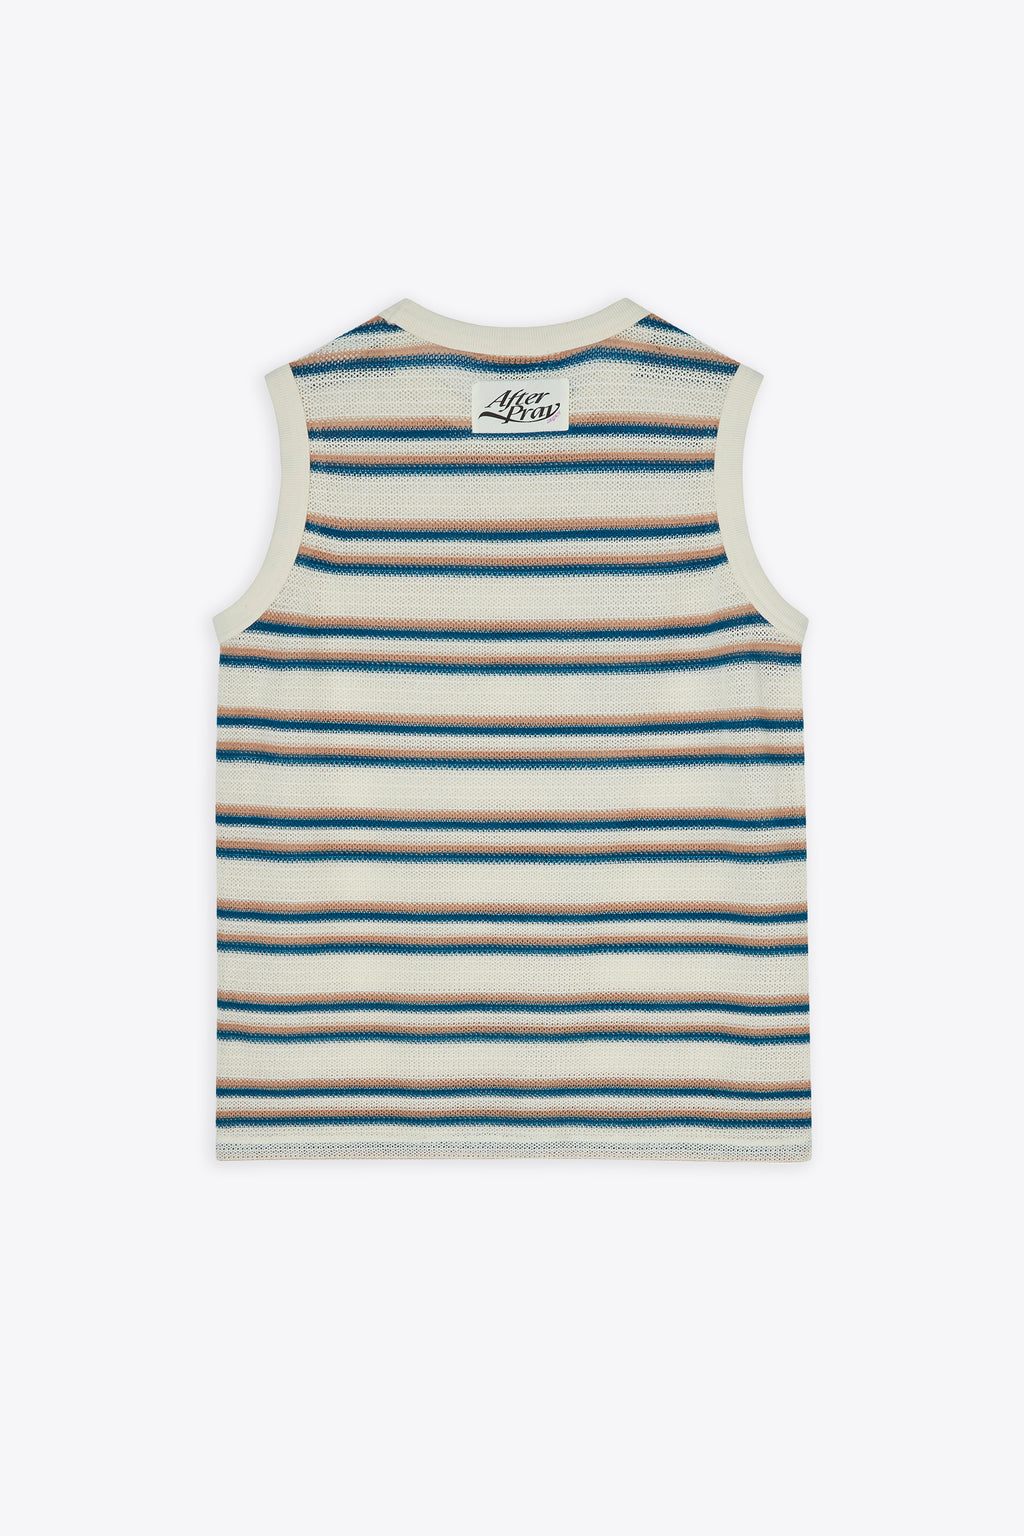 alt-image__Ivory-striped-mesh-knitted-sleeveless-t-shirt---Knitting-Mesh-Sleeveless-T-shirt